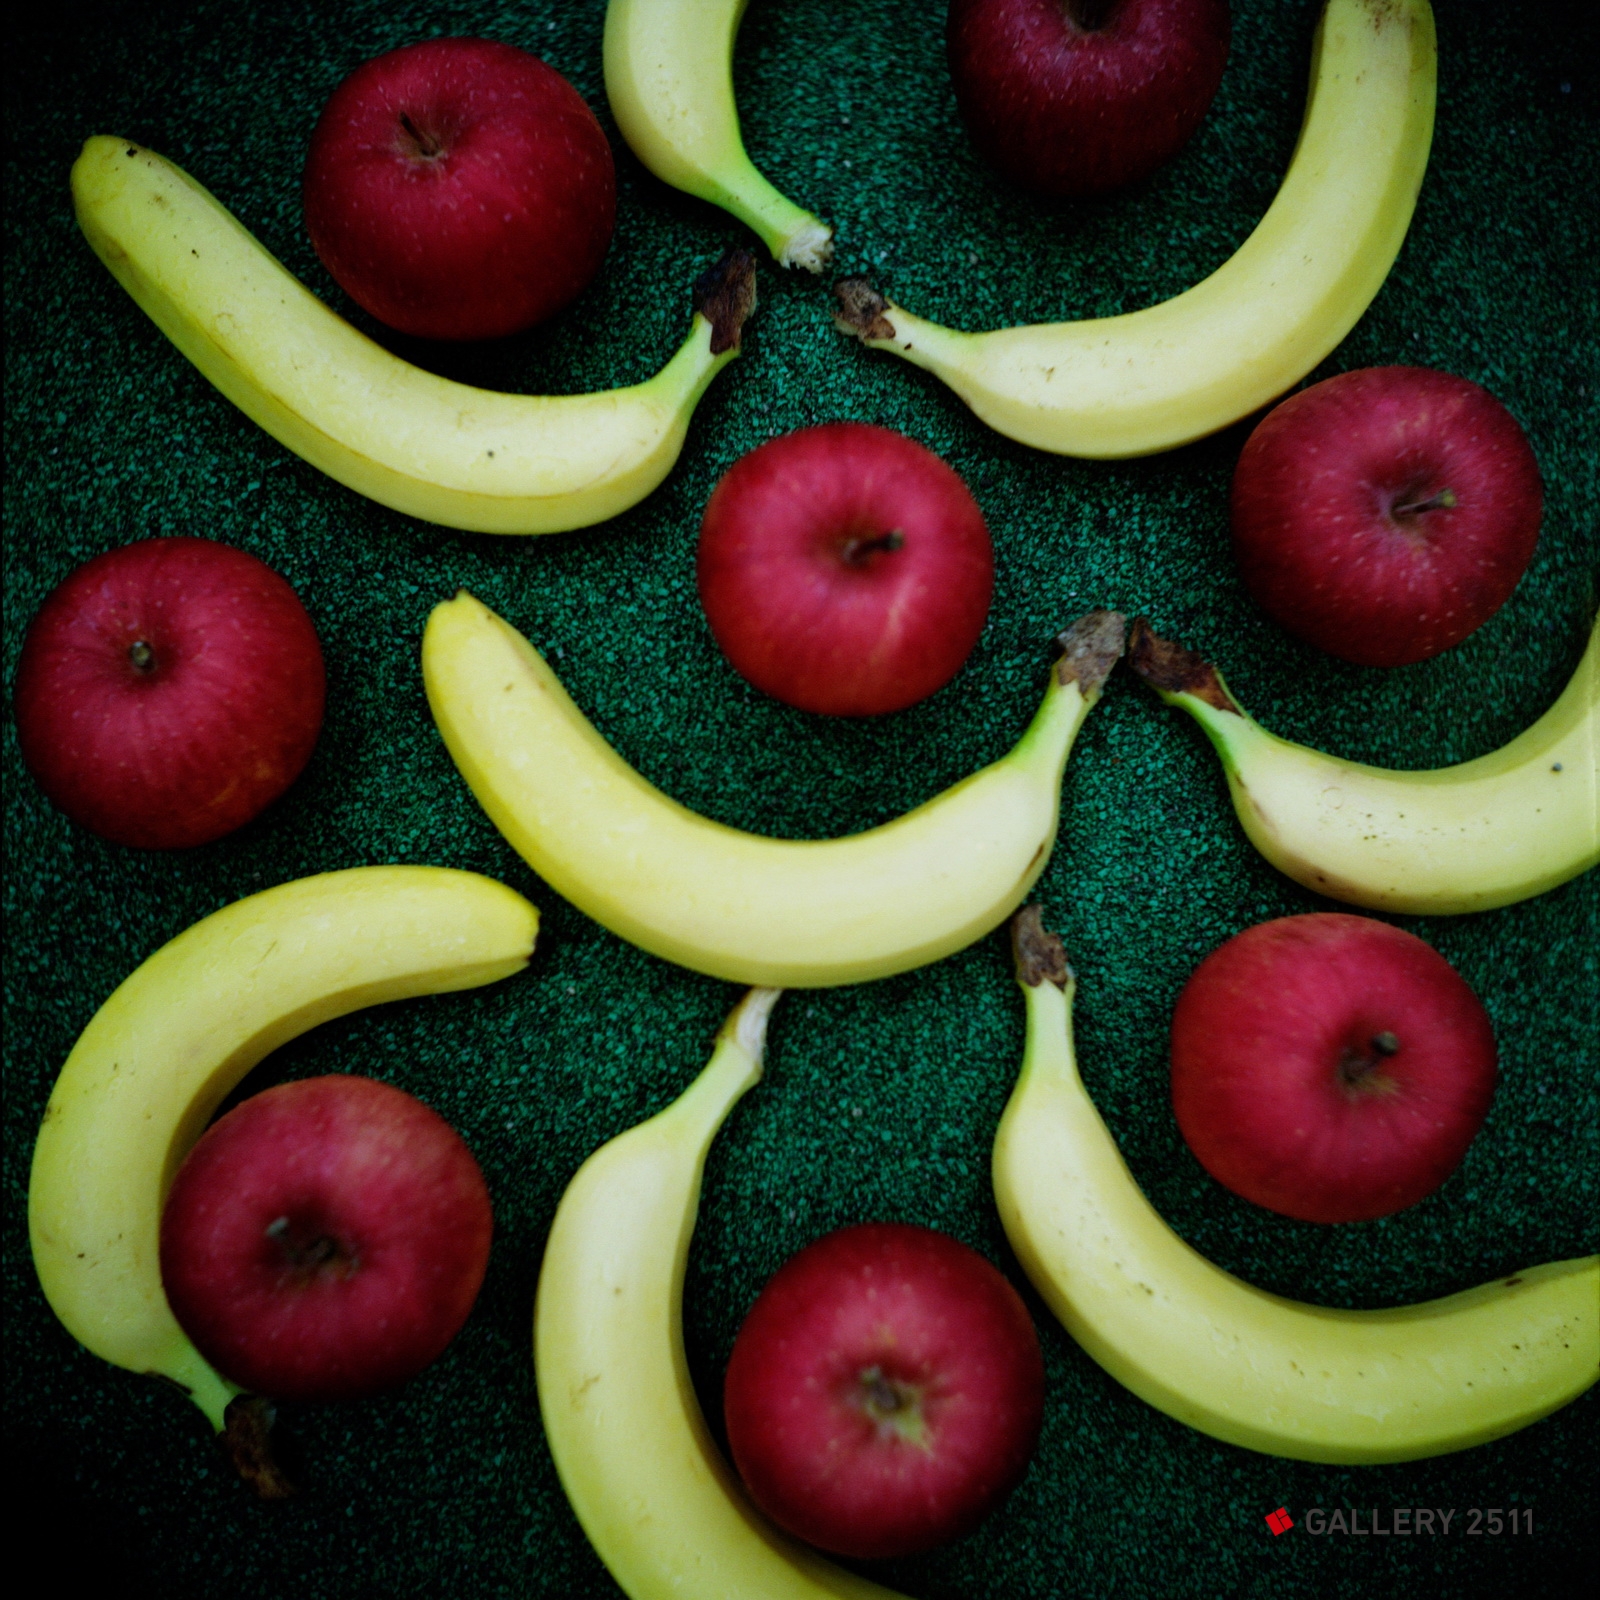 No.142 - 'Composition of apple and banana'
2007 Camera: Seagull 4A-103